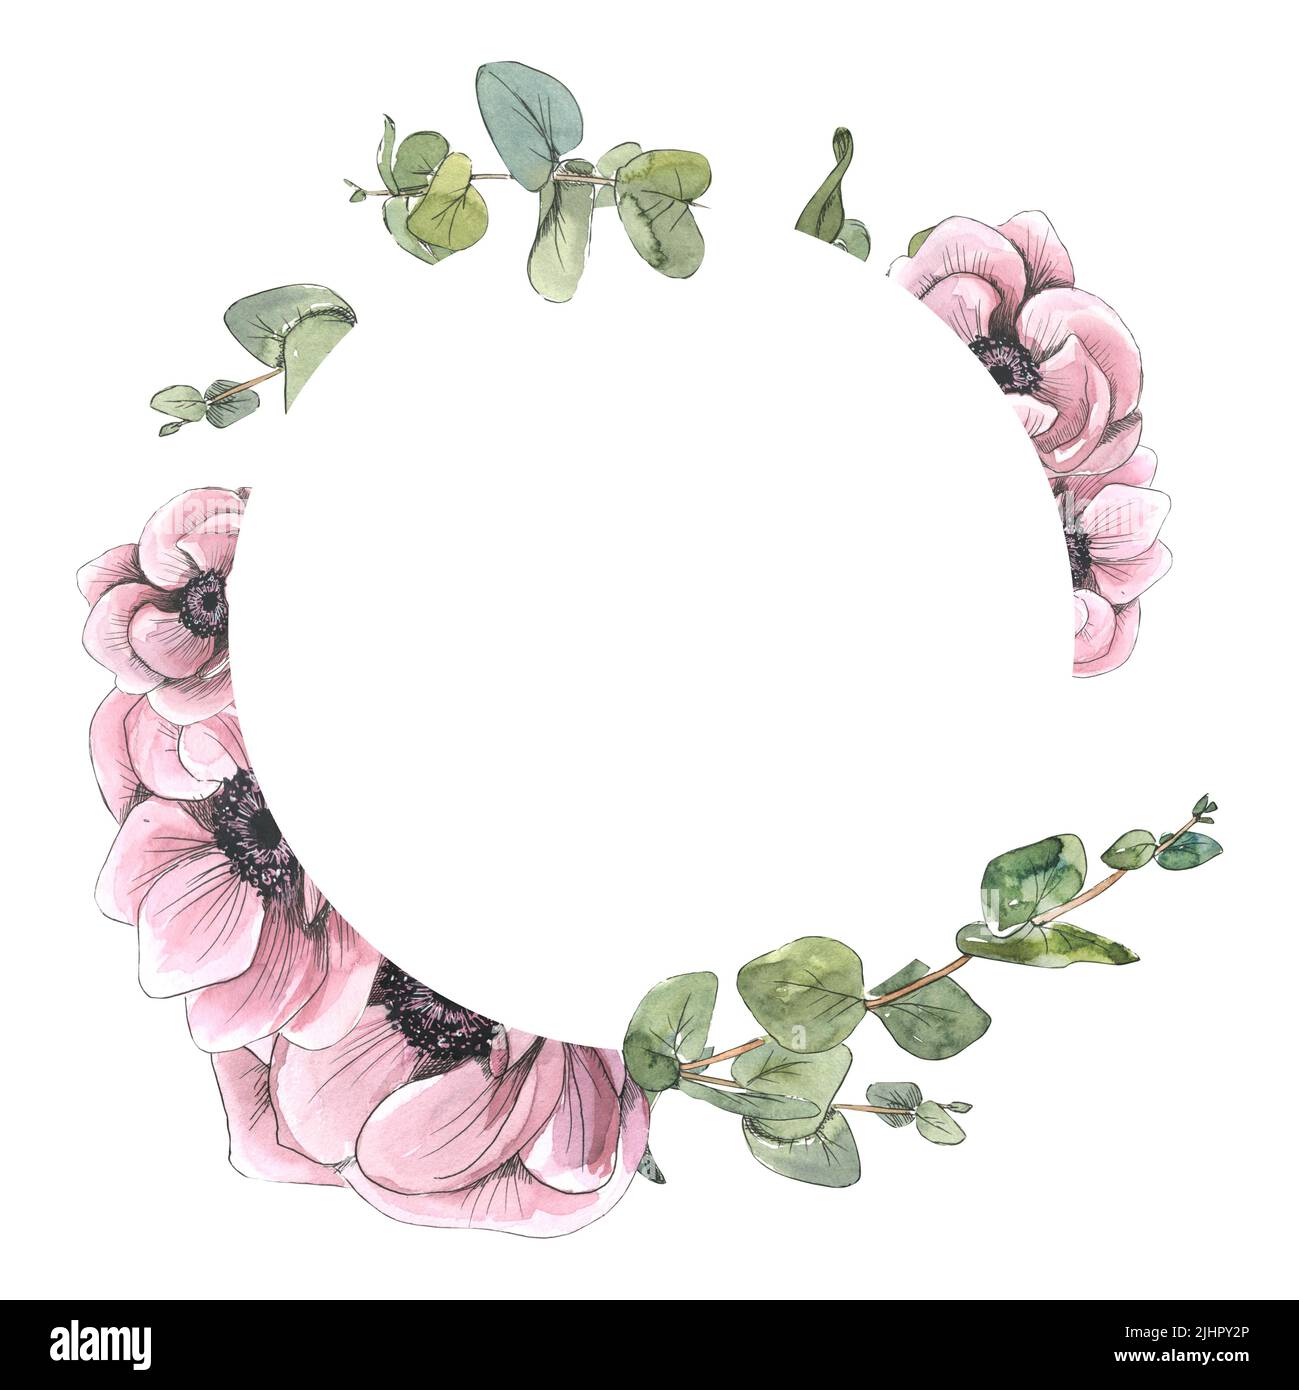 Round frame with anemone flowers, eucalyptus twigs. Watercolor illustration in sketch style, with graphic elements. A wreath from a large set of PARIS Stock Photo